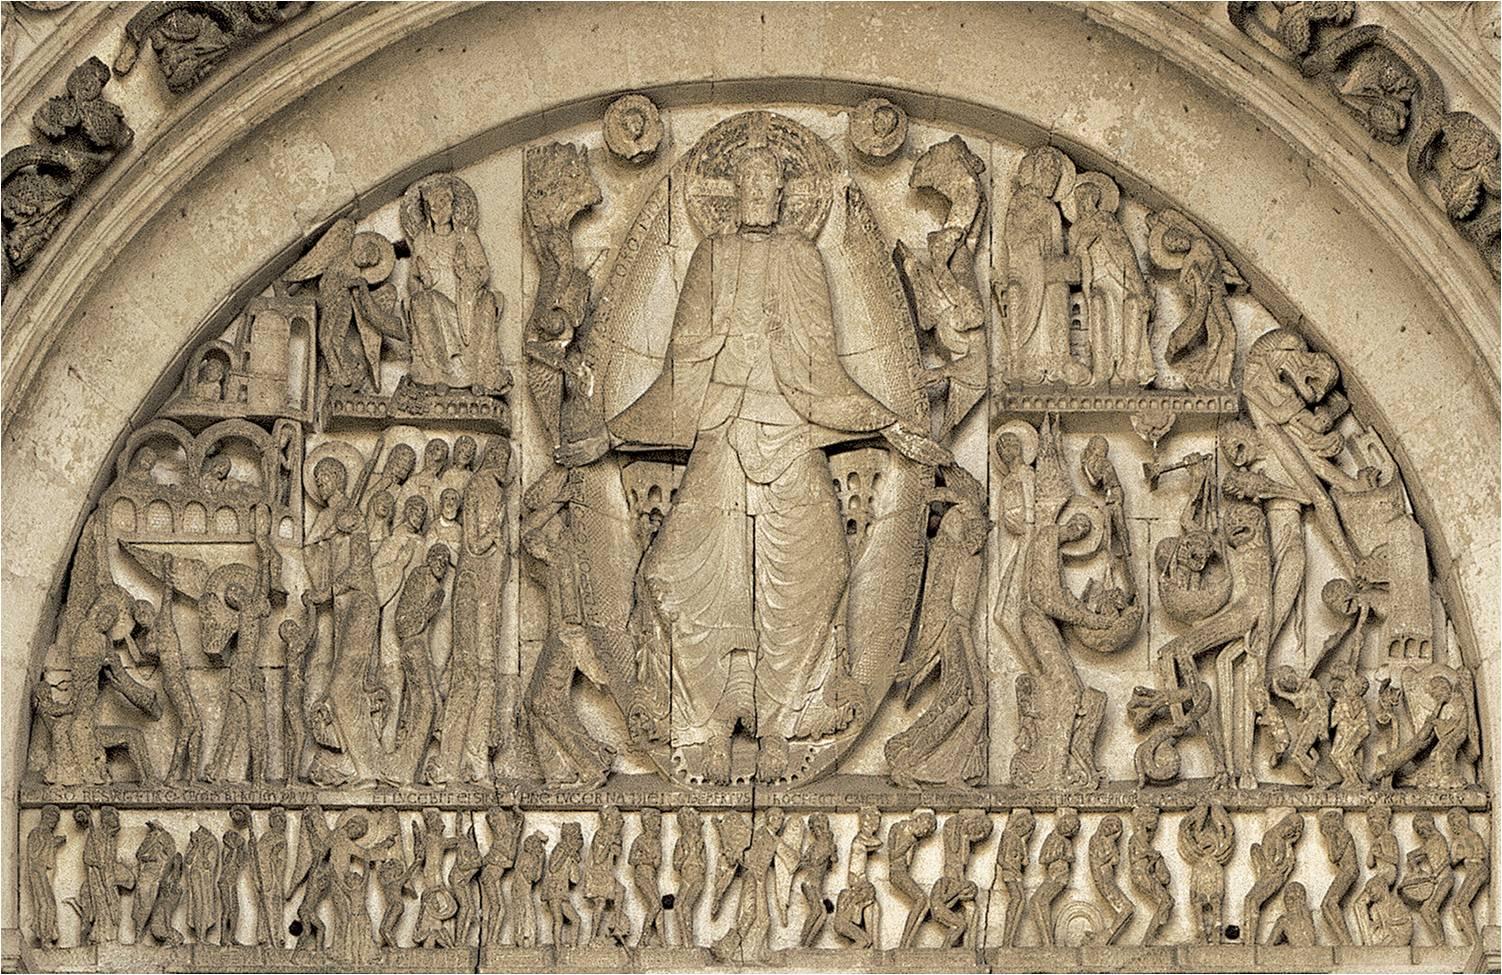 <p>-c. 1130-1146 Central Portal on the west Facade of the cathedral of St. Lazare, France</p><ul><li><p>Images represent text. The center figure is Christ, he is frontal and symmetrical, and he is sitting on the throne of Heaven. -The left side people are those who are dammed to  Hell and to his right are the blessed who are going to Heaven. The Virgin Mary is enthroned in Heaven. and an angel is blowing a horn signaling the Coming of Christ.</p></li><li><p>St. Michael is shown weighing souls for the morality of sins. -The figures going to hell are saddened. -The bottom shows the souls rising from the dead, as well as angels of death terrifying souls</p></li><li><p>Engraved in the bottom is &quot;Gislebertus hoc fecit&quot; Gislebertus made this</p></li></ul>